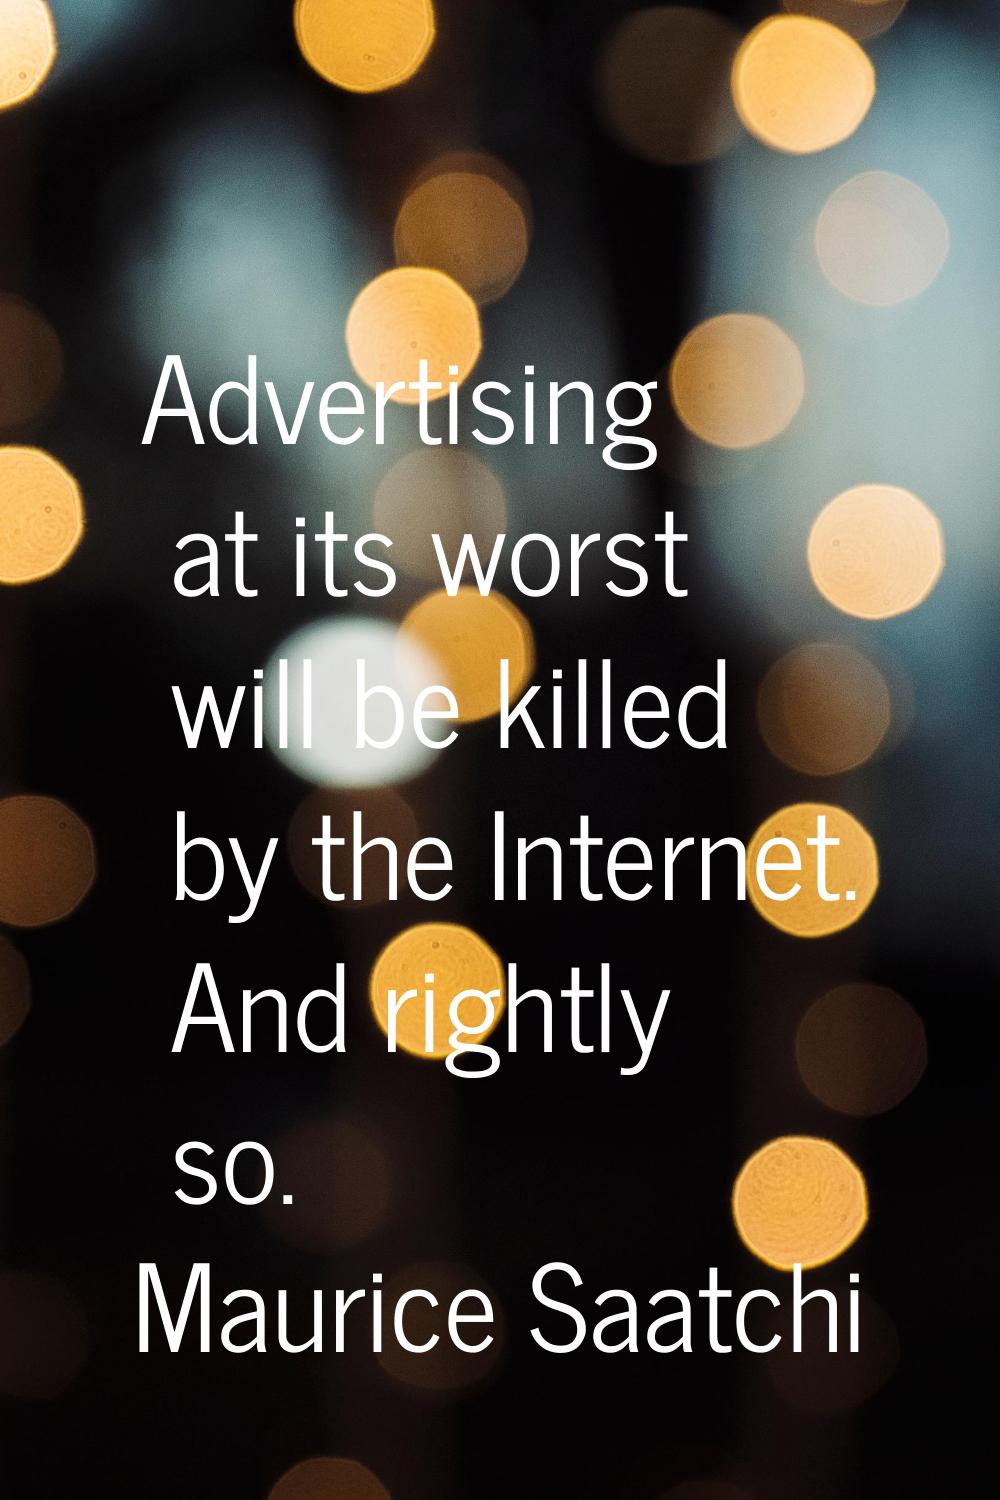 Advertising at its worst will be killed by the Internet. And rightly so.